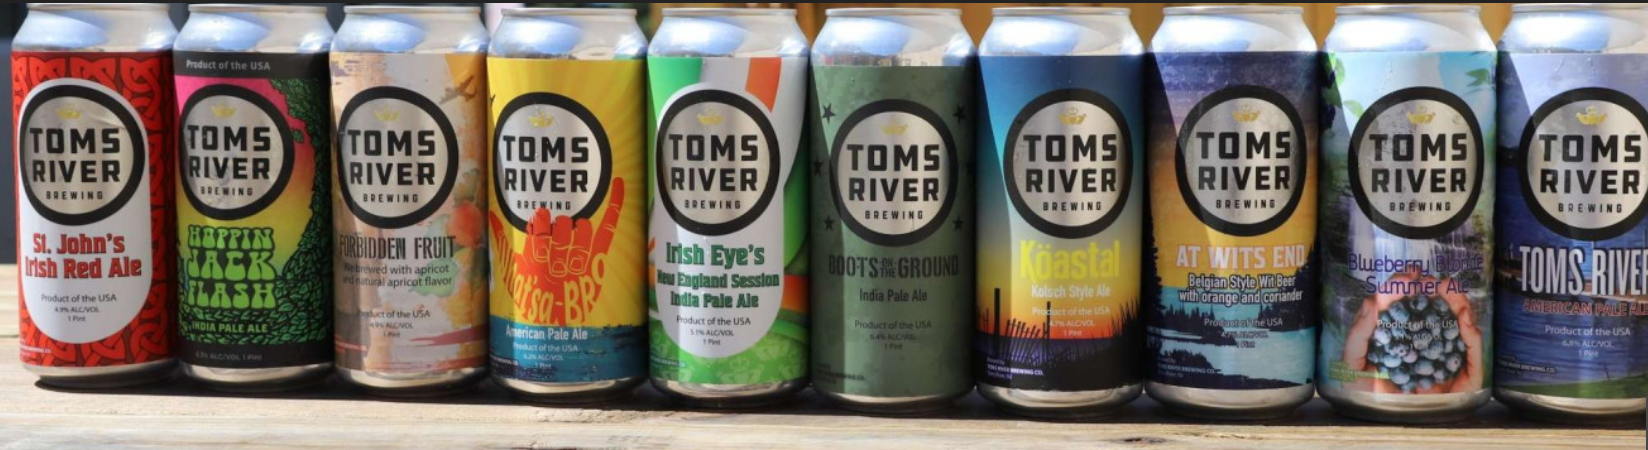 toms-river-brewing-beer-choices